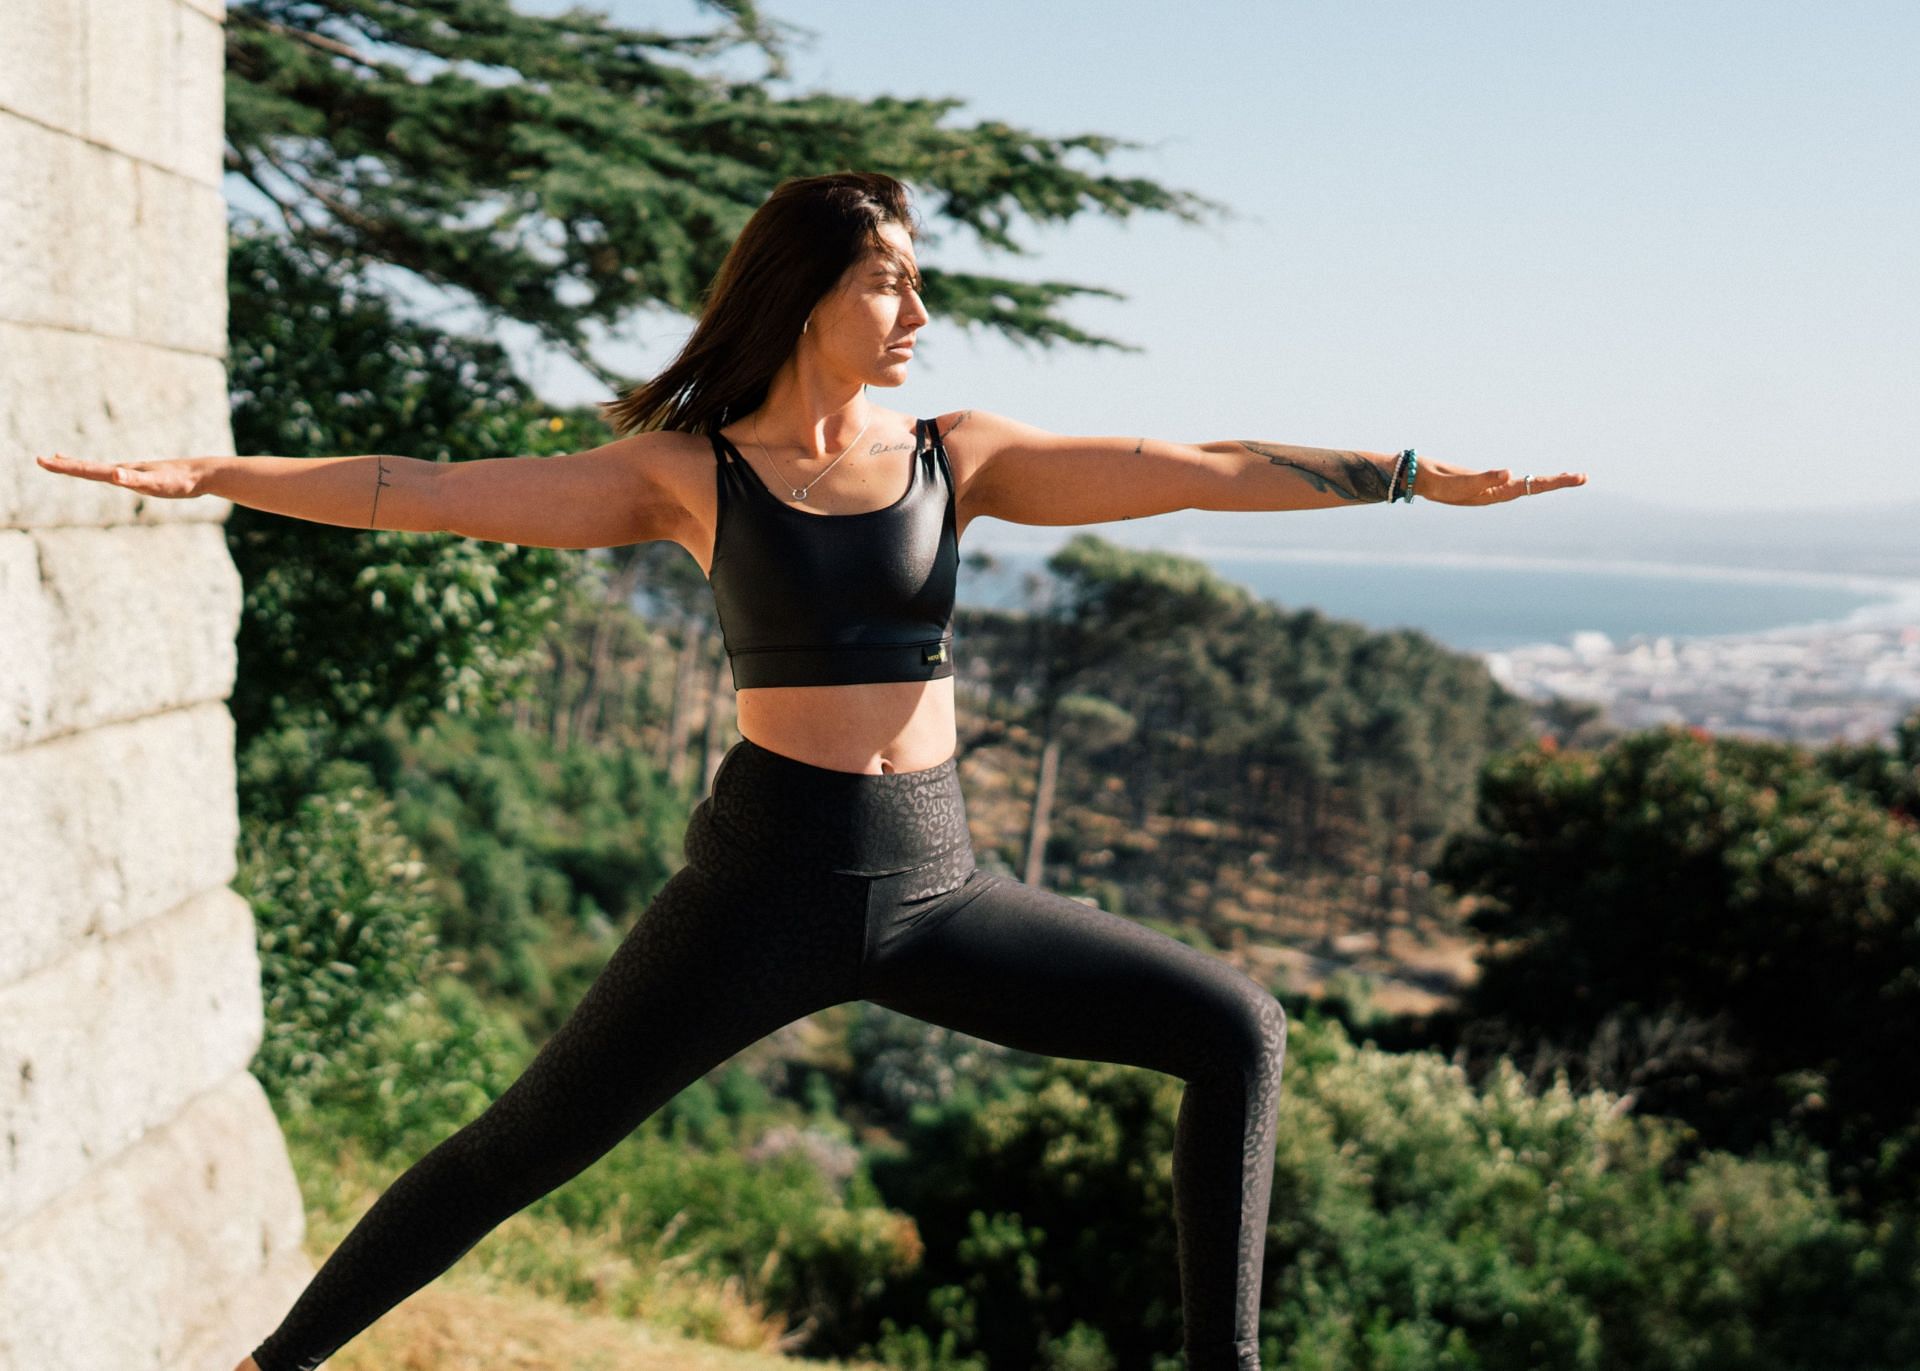 Vinyasa yoga is a good for beginners, as it allows rapid paced, flowing movements that let you connect with your body (Image via Pexels @Rfstudio)